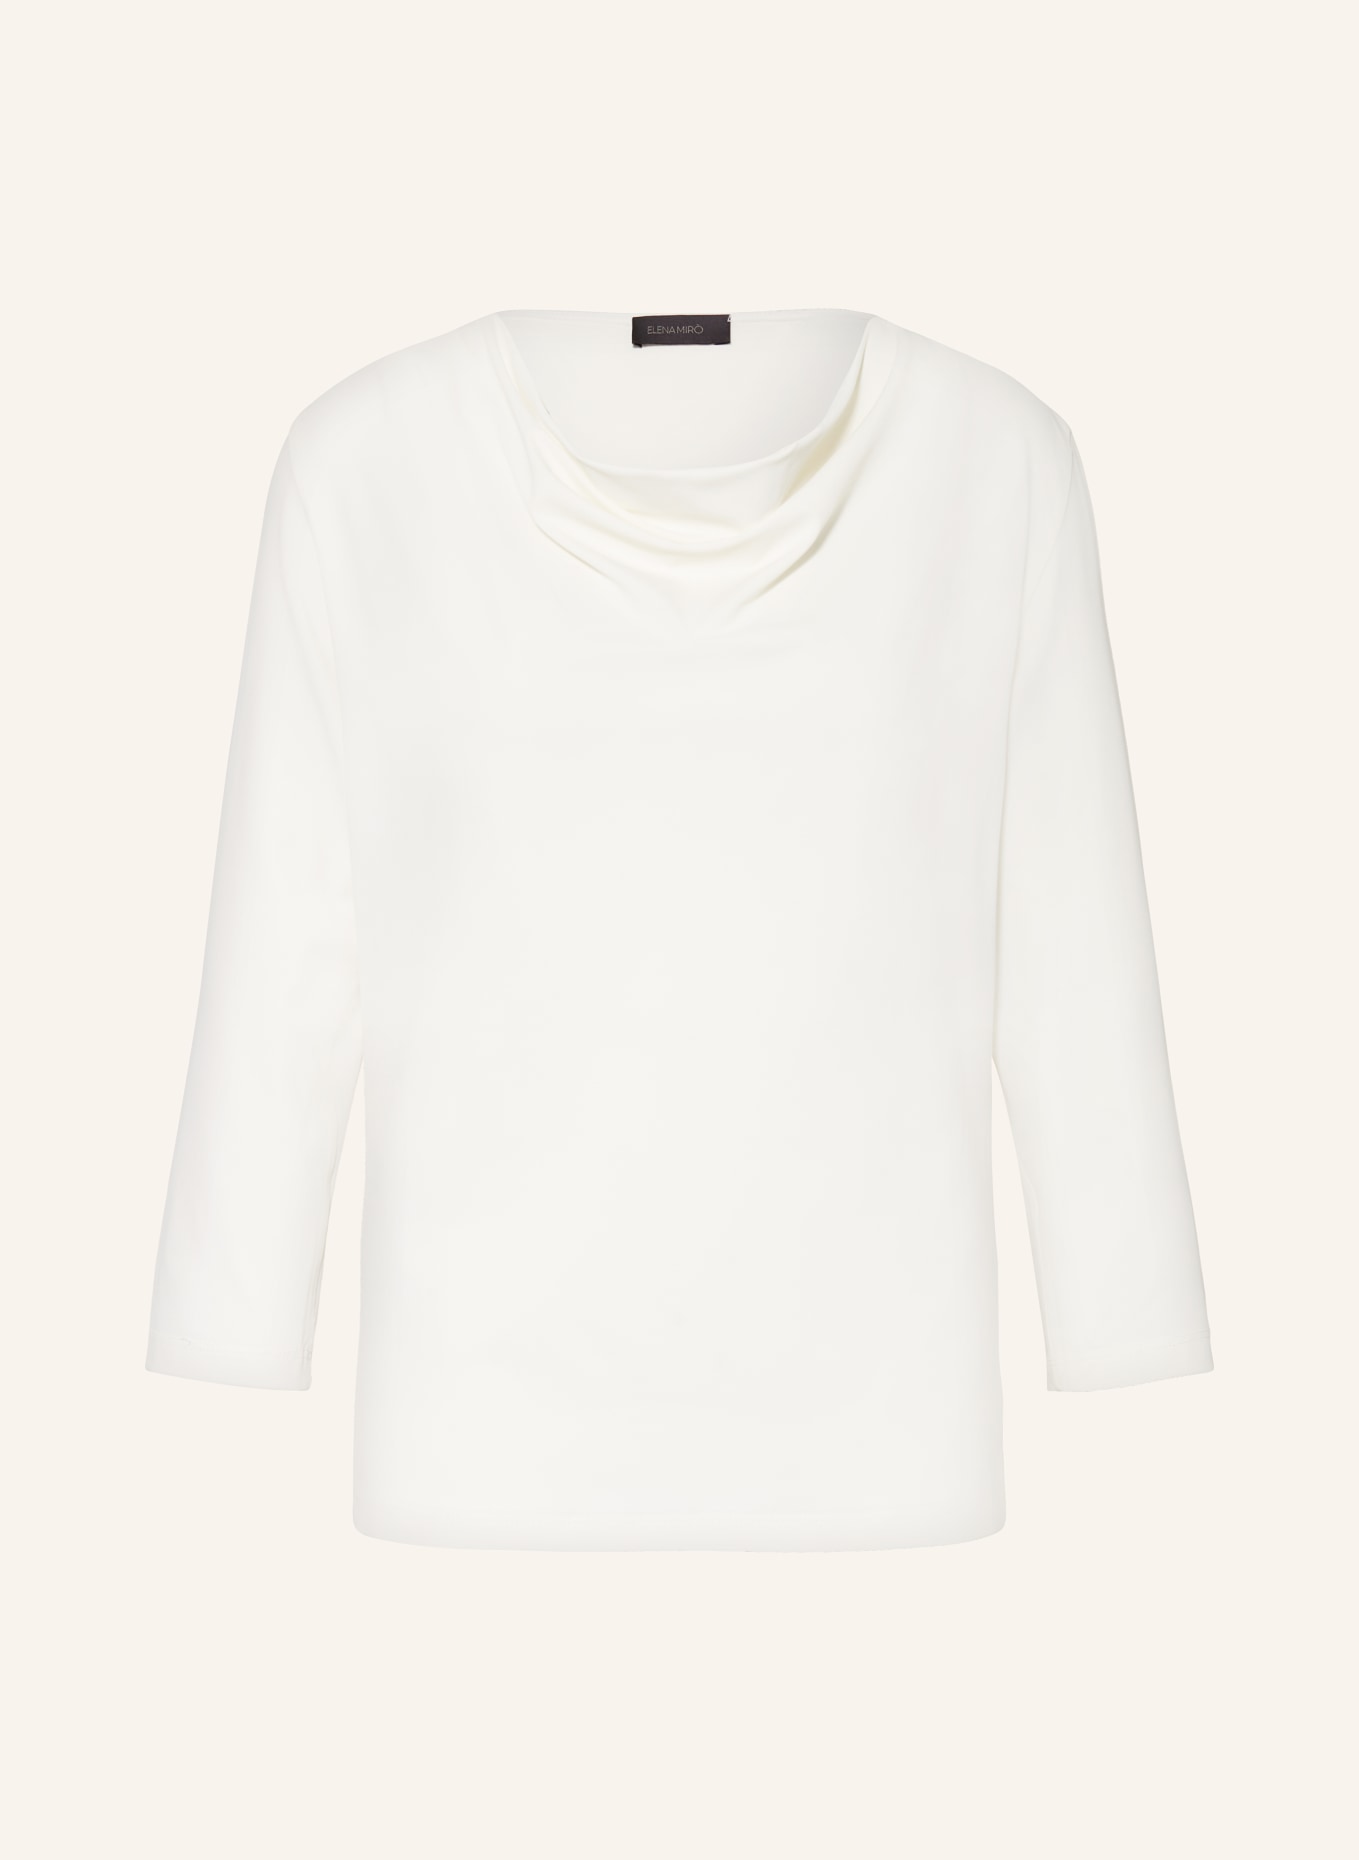 ELENA MIRO Shirt blouse with 3/4 sleeves, Color: WHITE (Image 1)